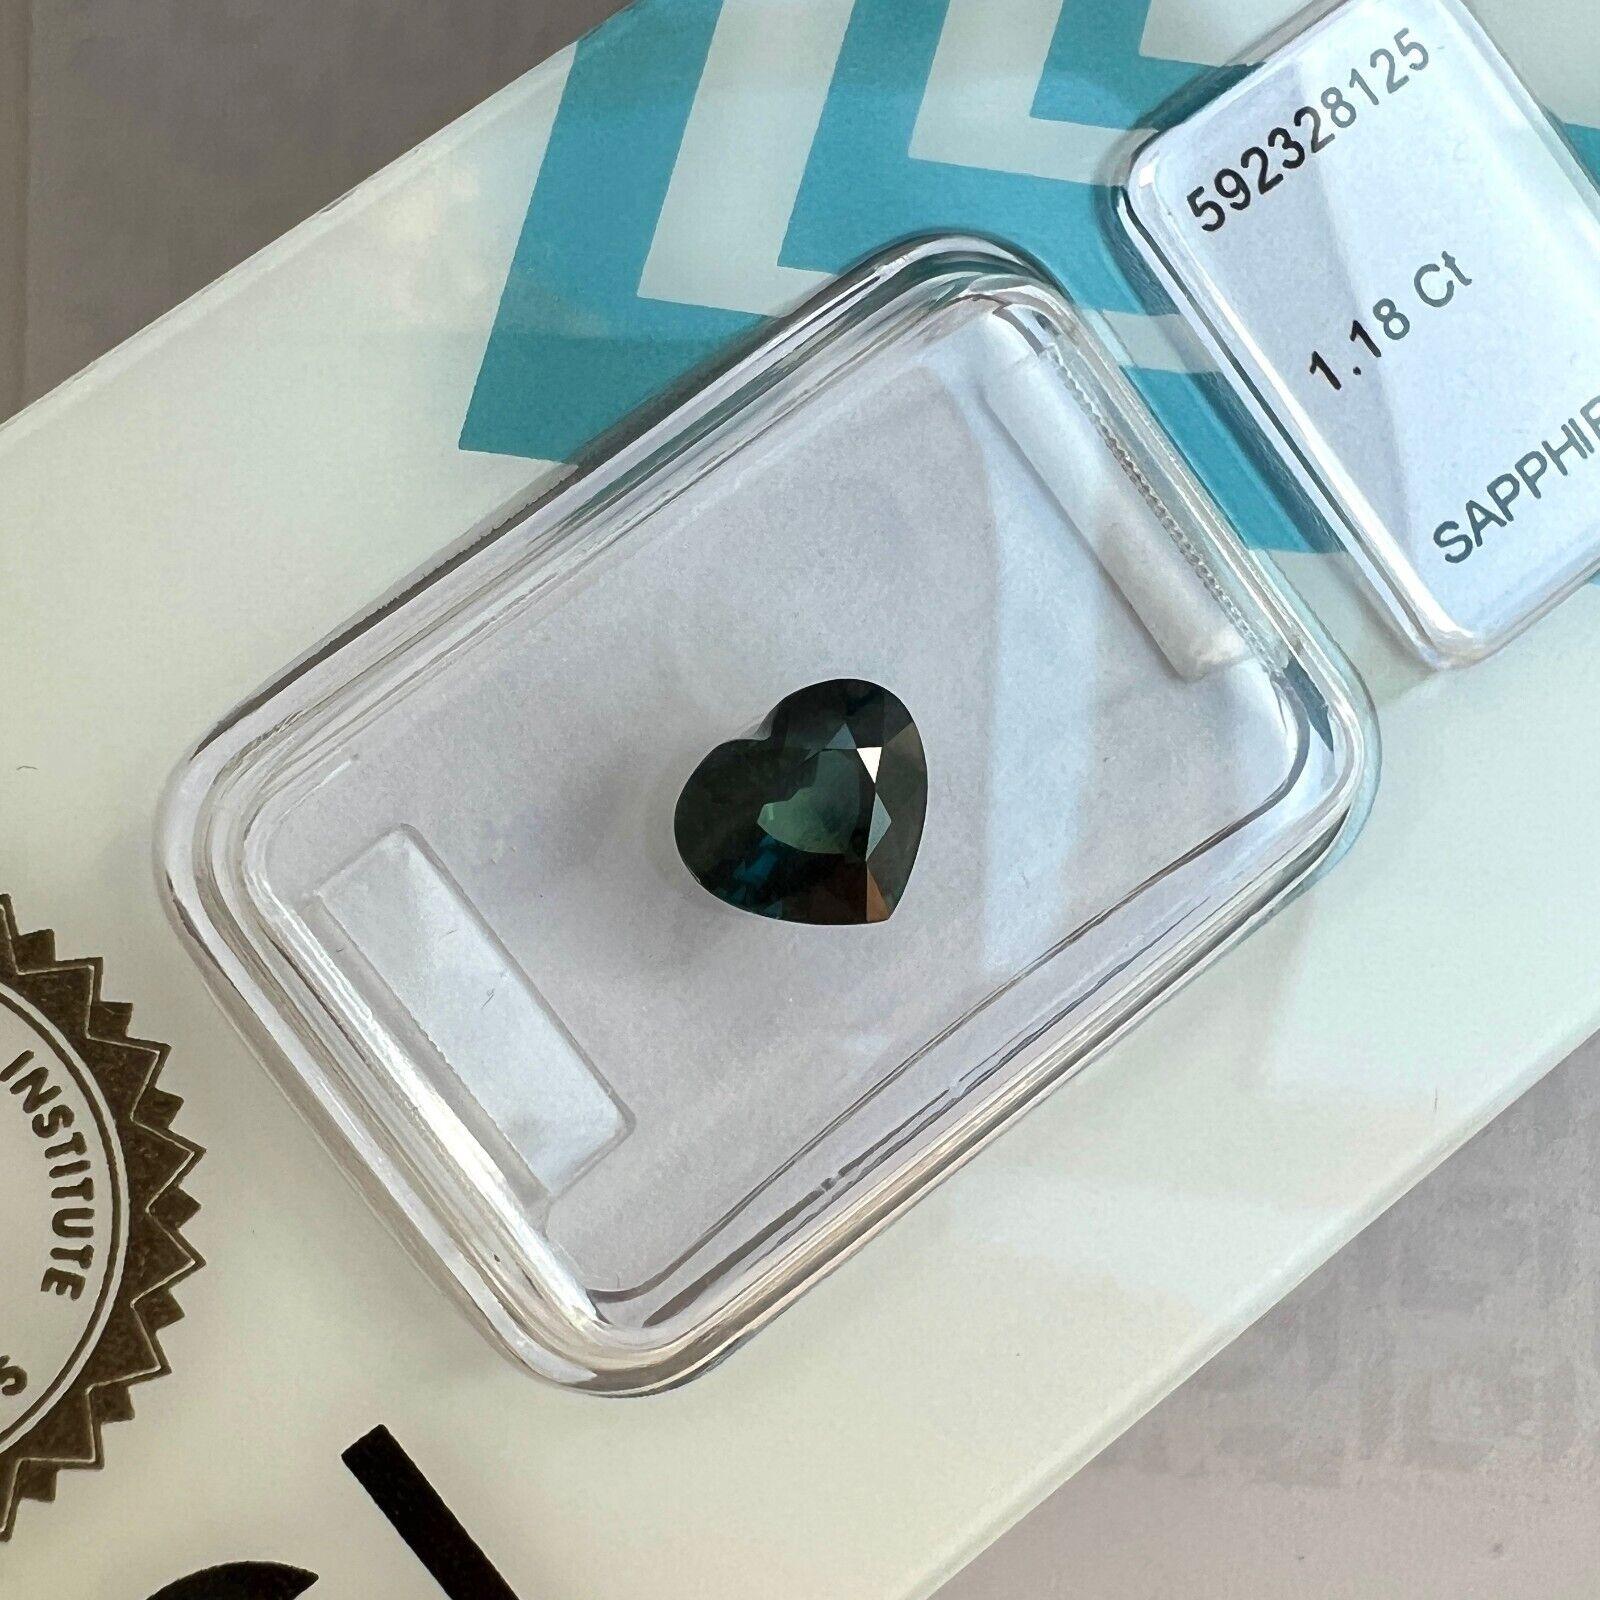 Natural 1.18Ct Deep Green Blue Teal Sapphire Heart Cut IGI Certified Gemstone

Fine Deep Green Blue ‘Teal’ Sapphire In IGI Blister.
1.18 Carat with an excellent heart cut and excellent clarity, clean stone. VS.
This sapphire is also totally